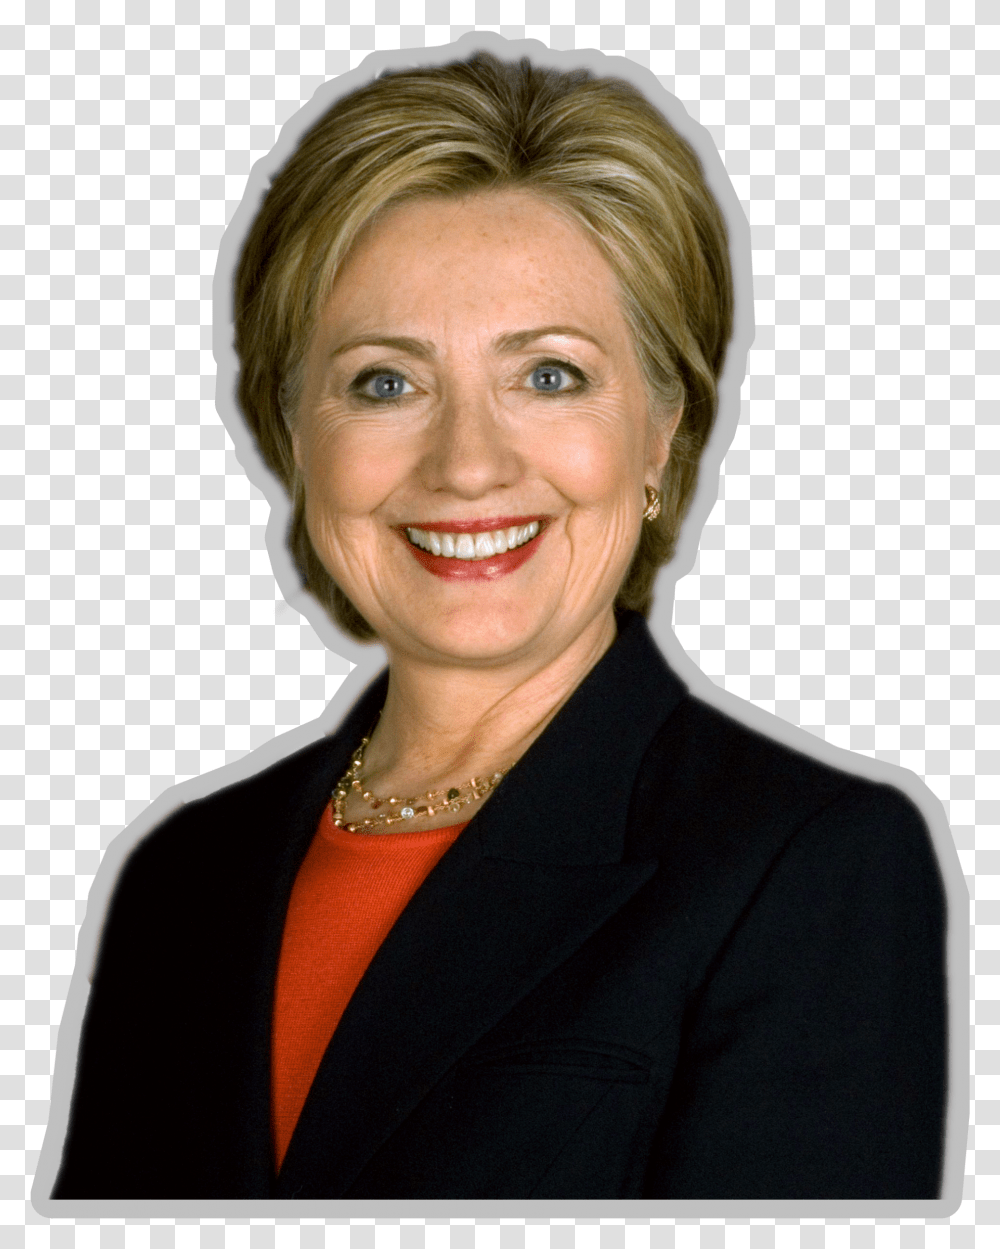 Hillary Clinton No Background Transparent Png